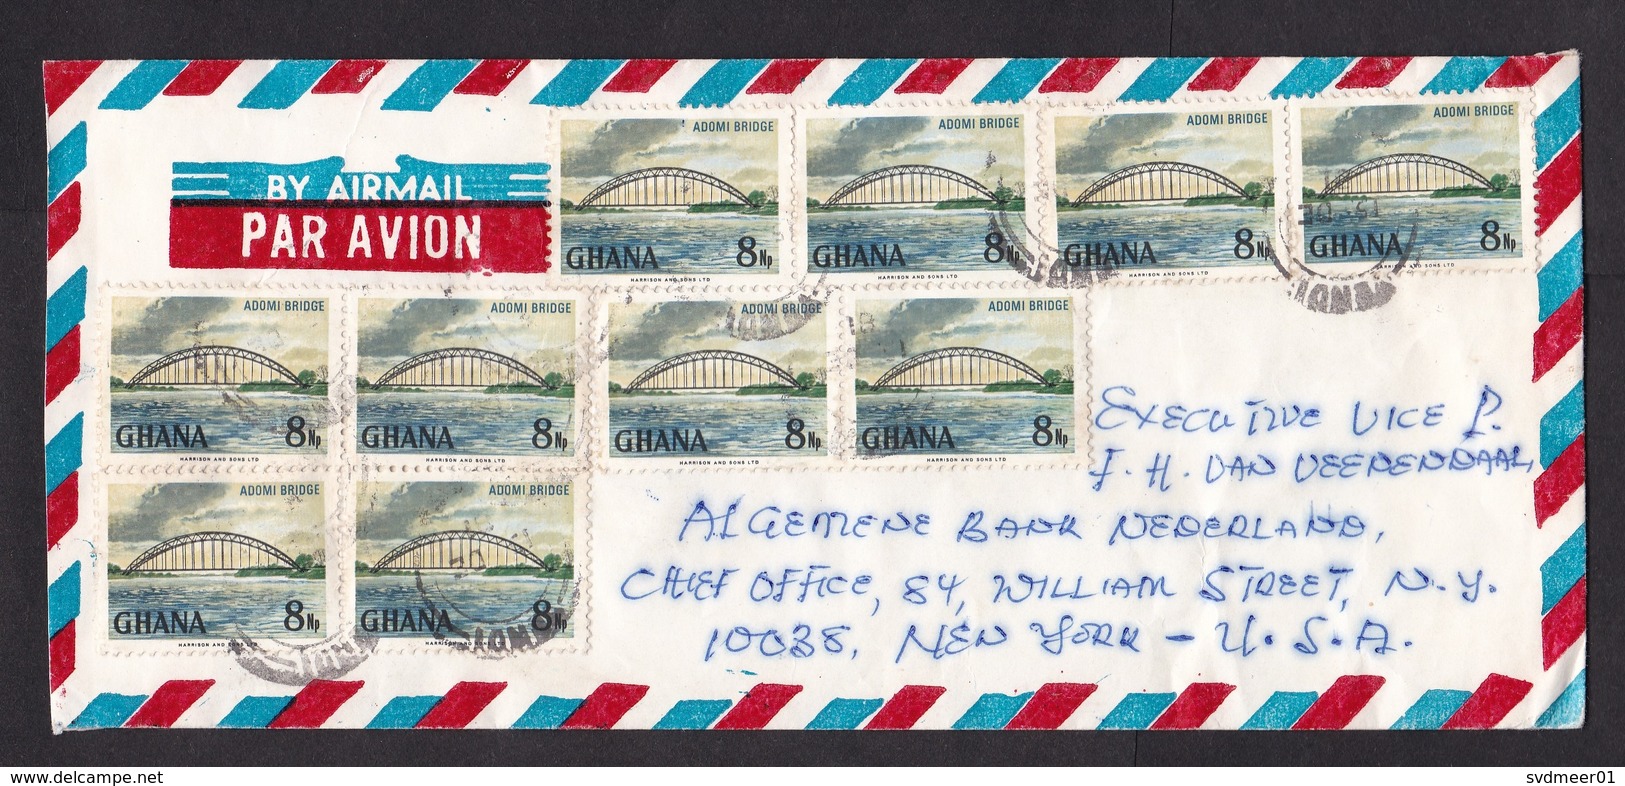 Ghana: Airmail Cover To USA, 1981, 10 Stamps, Adomi Bridge, Transport, Infrastructure (minor Damage) - Ghana (1957-...)